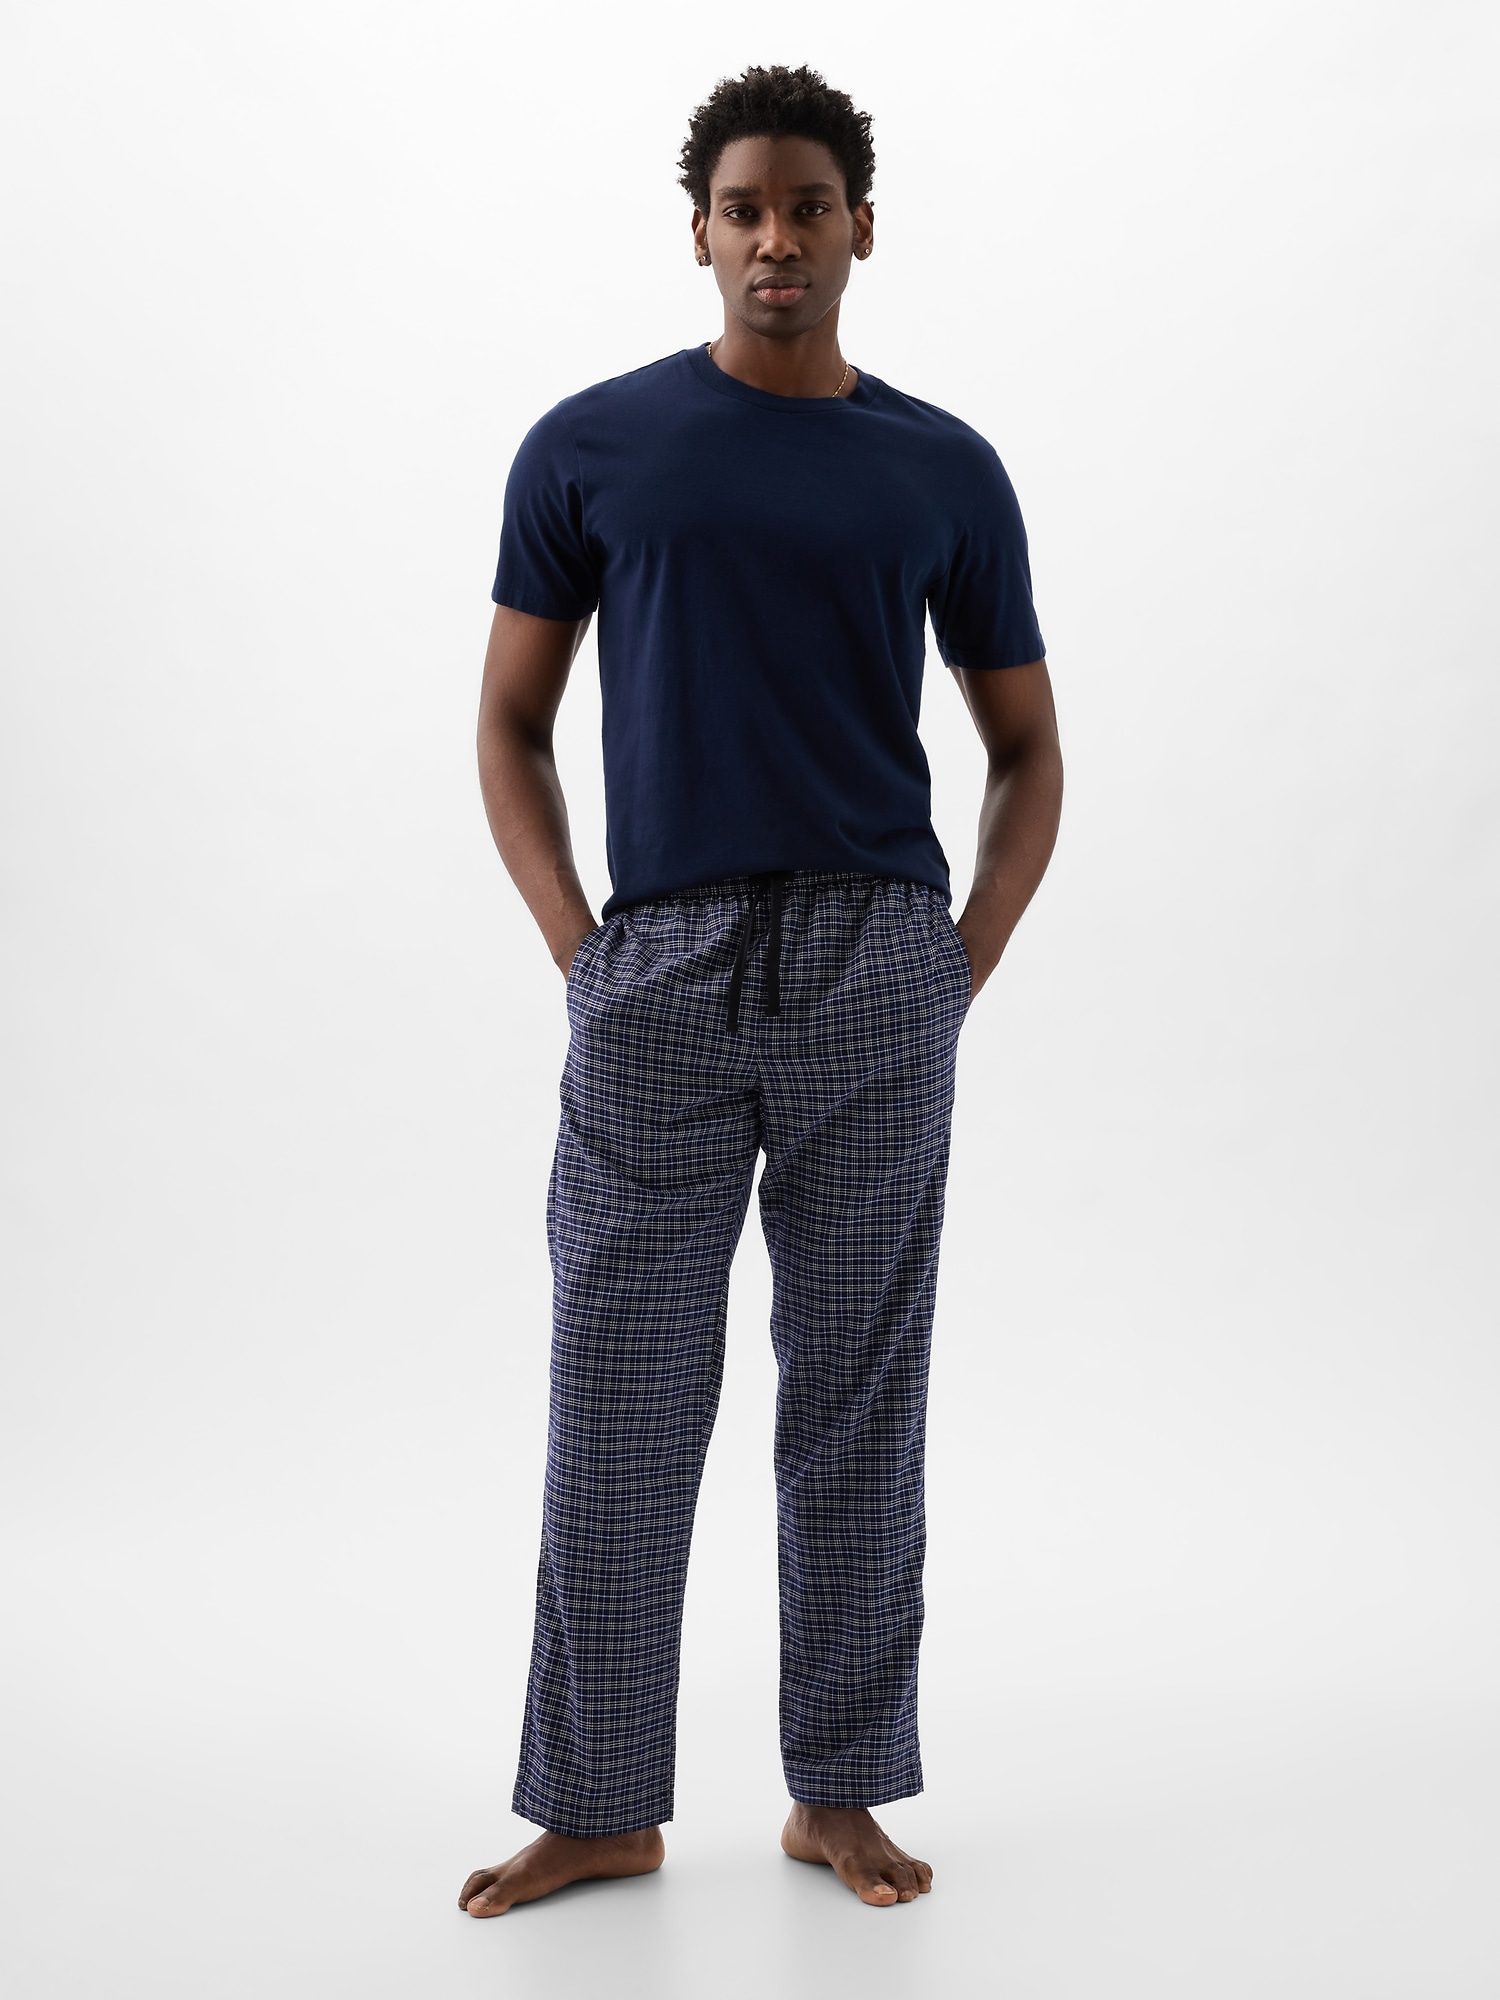 TAP Flannel PJ Pants - Triangle Aphasia Project